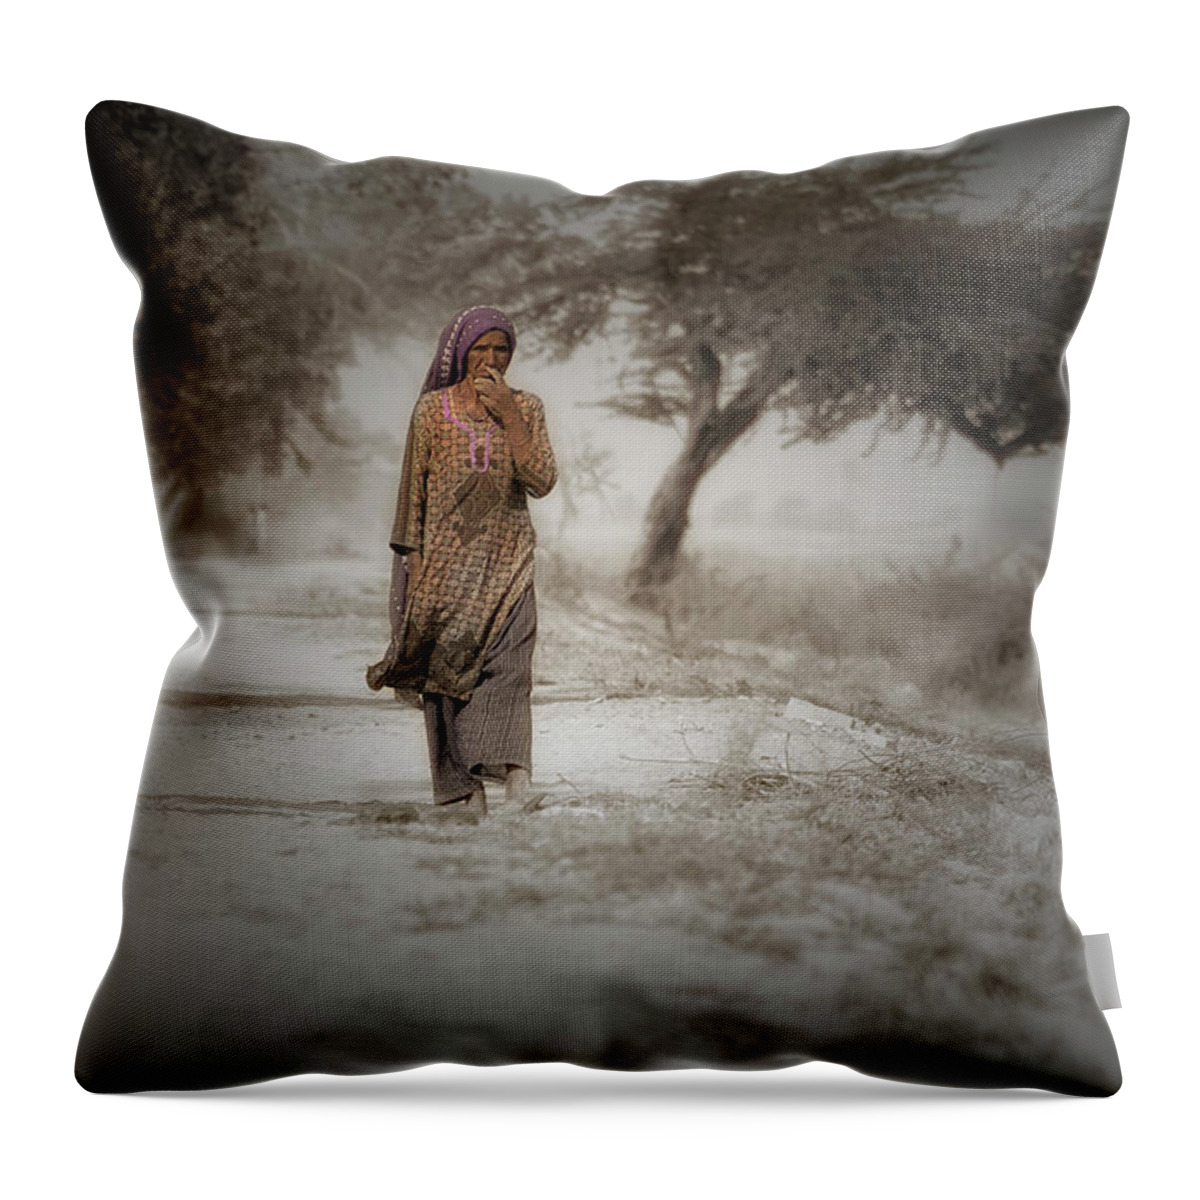 Village Life Throw Pillow featuring the photograph Village woman by Syed Muhammad Munir ul Haq